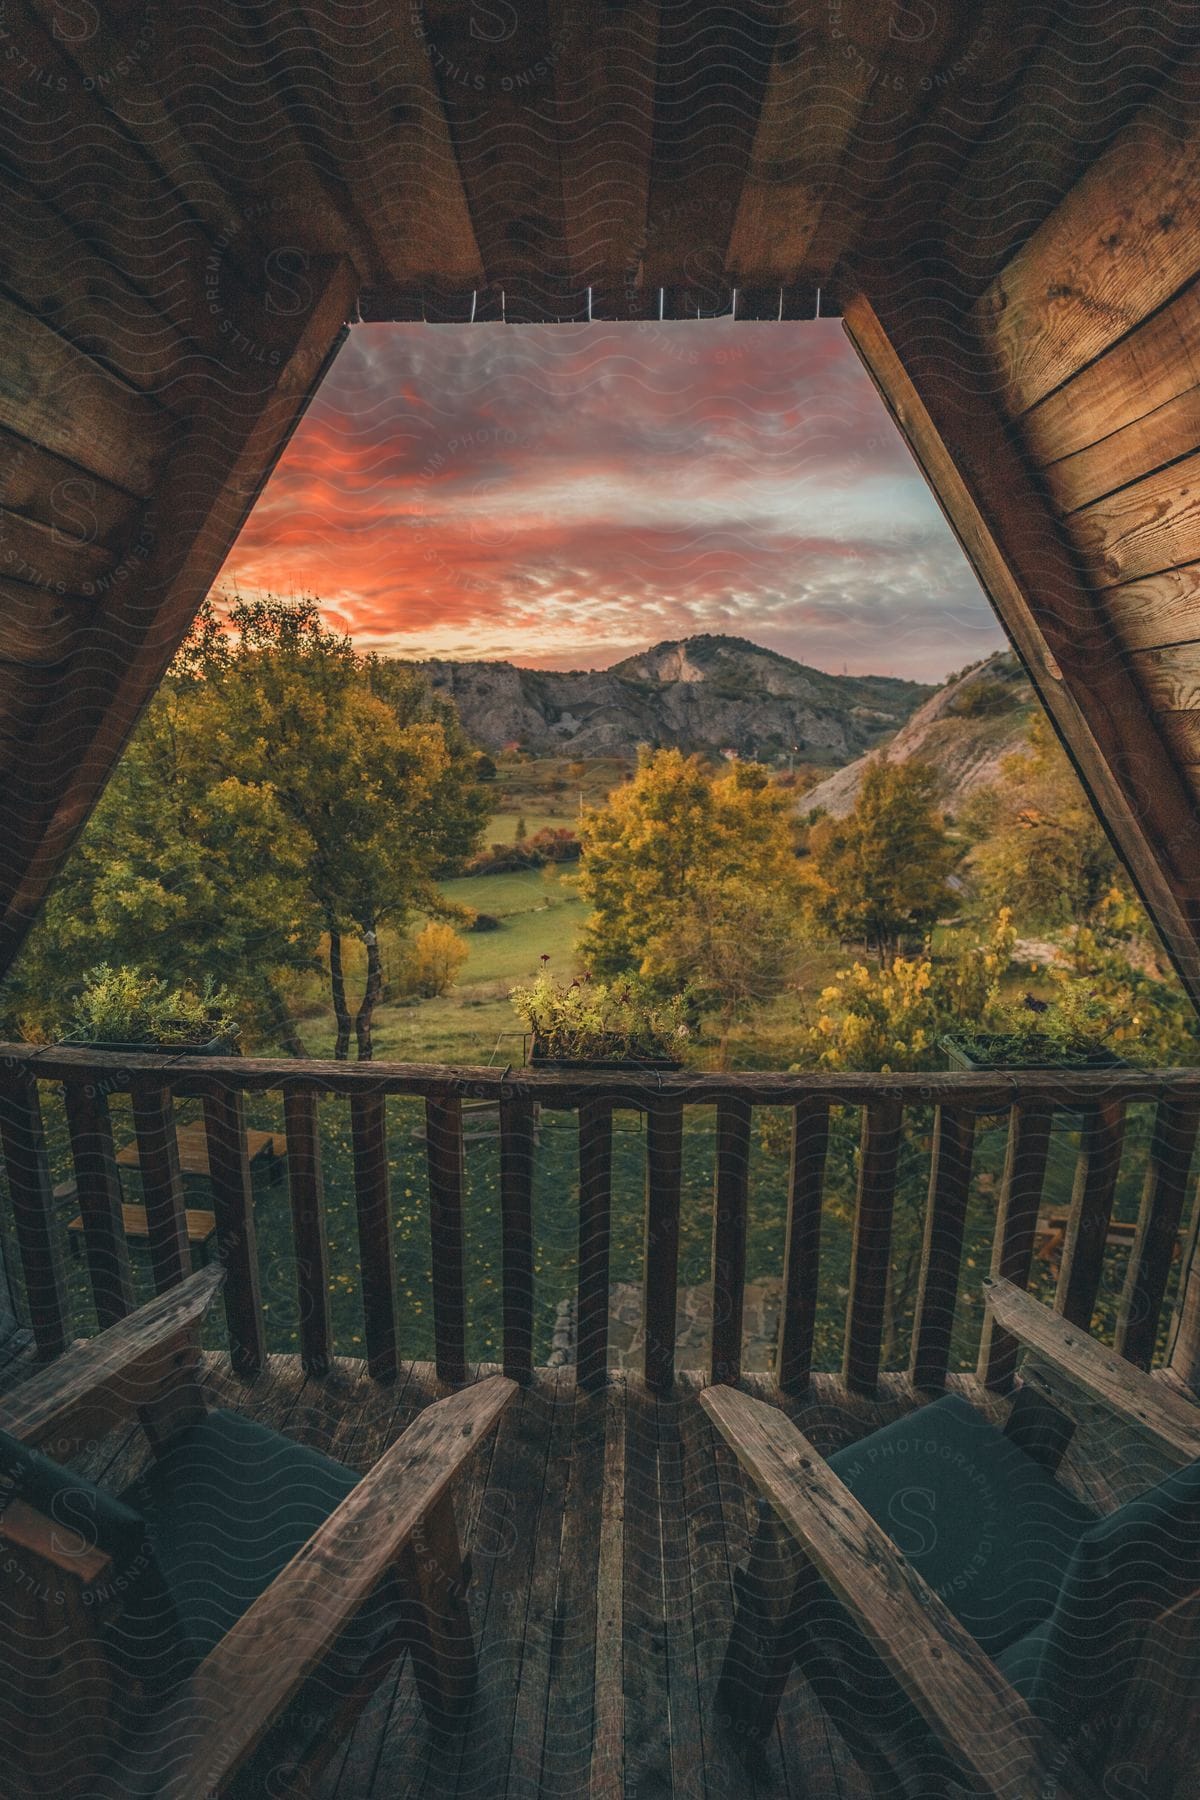 A stunning view of a natural landscape at sunset seen from inside a wooden cabin.